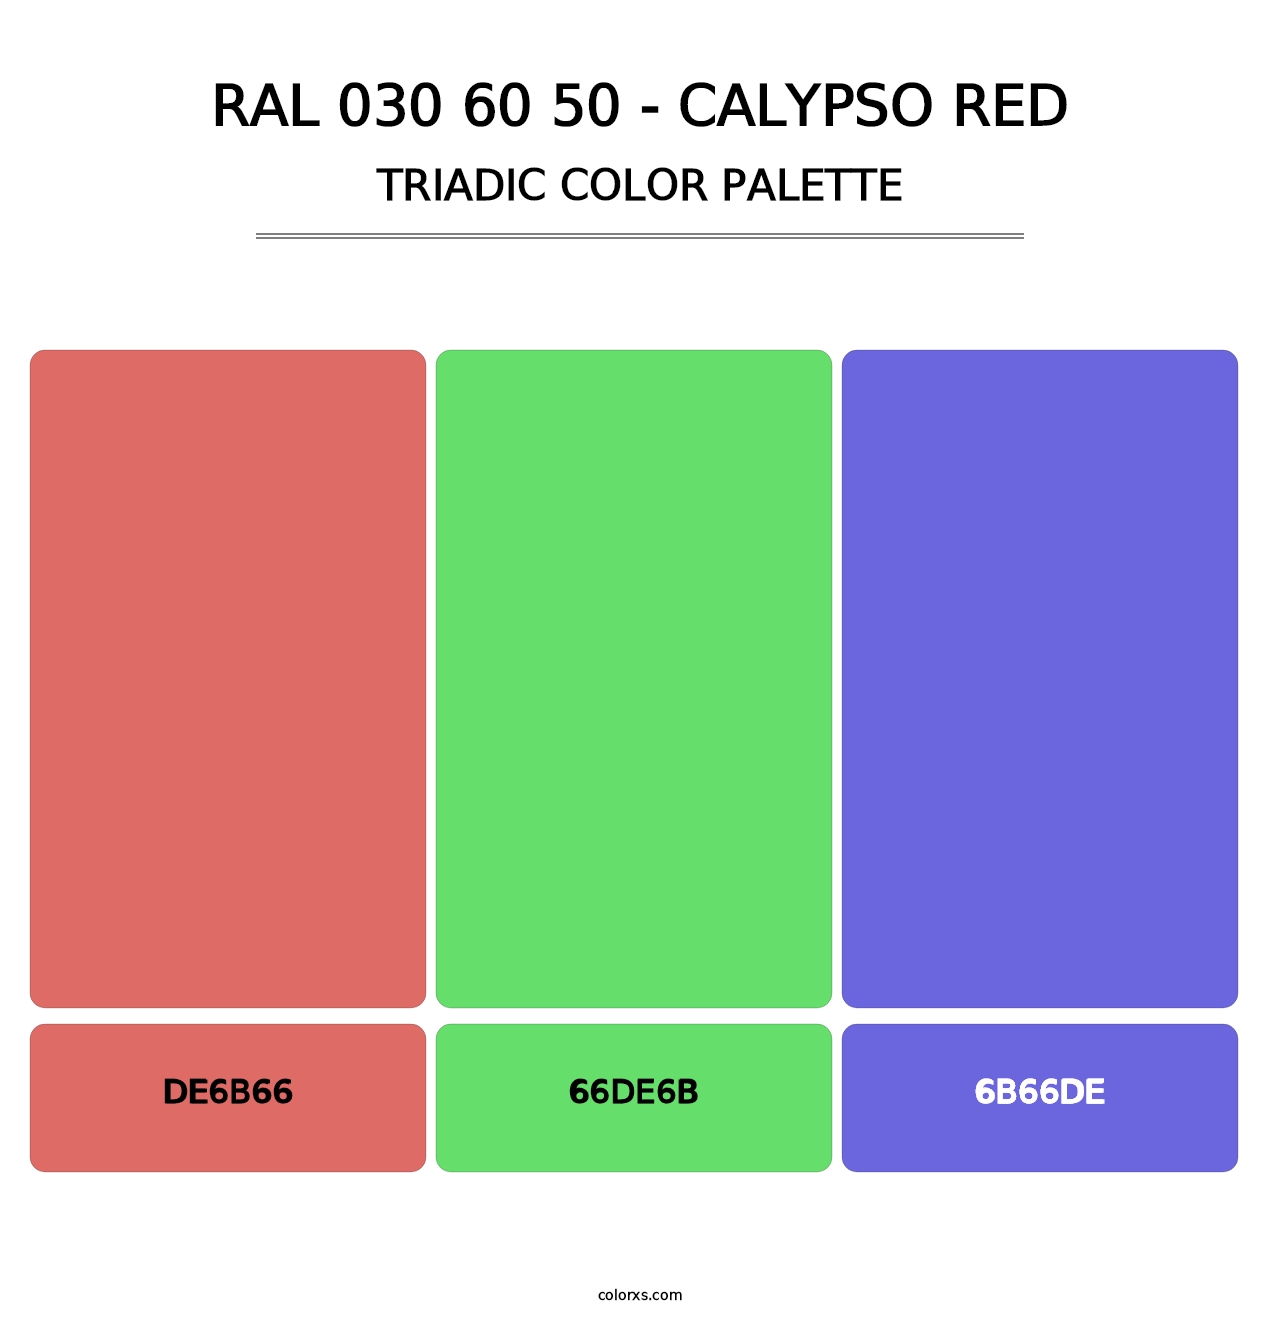 RAL 030 60 50 - Calypso Red - Triadic Color Palette